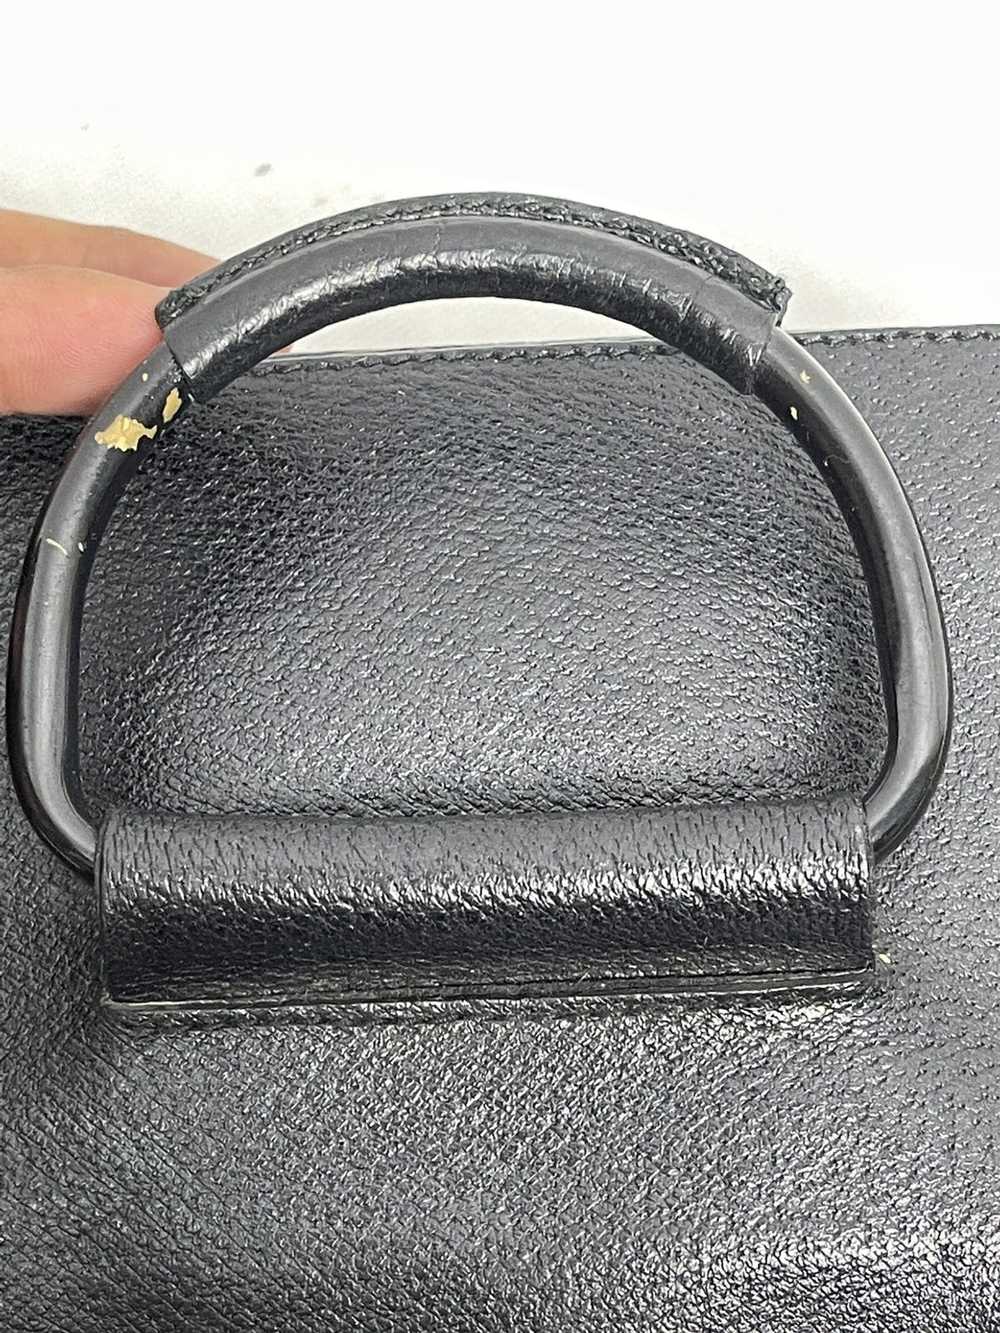 Gucci Authentic Vintage Gucci Black Cosmetic Bag - image 12